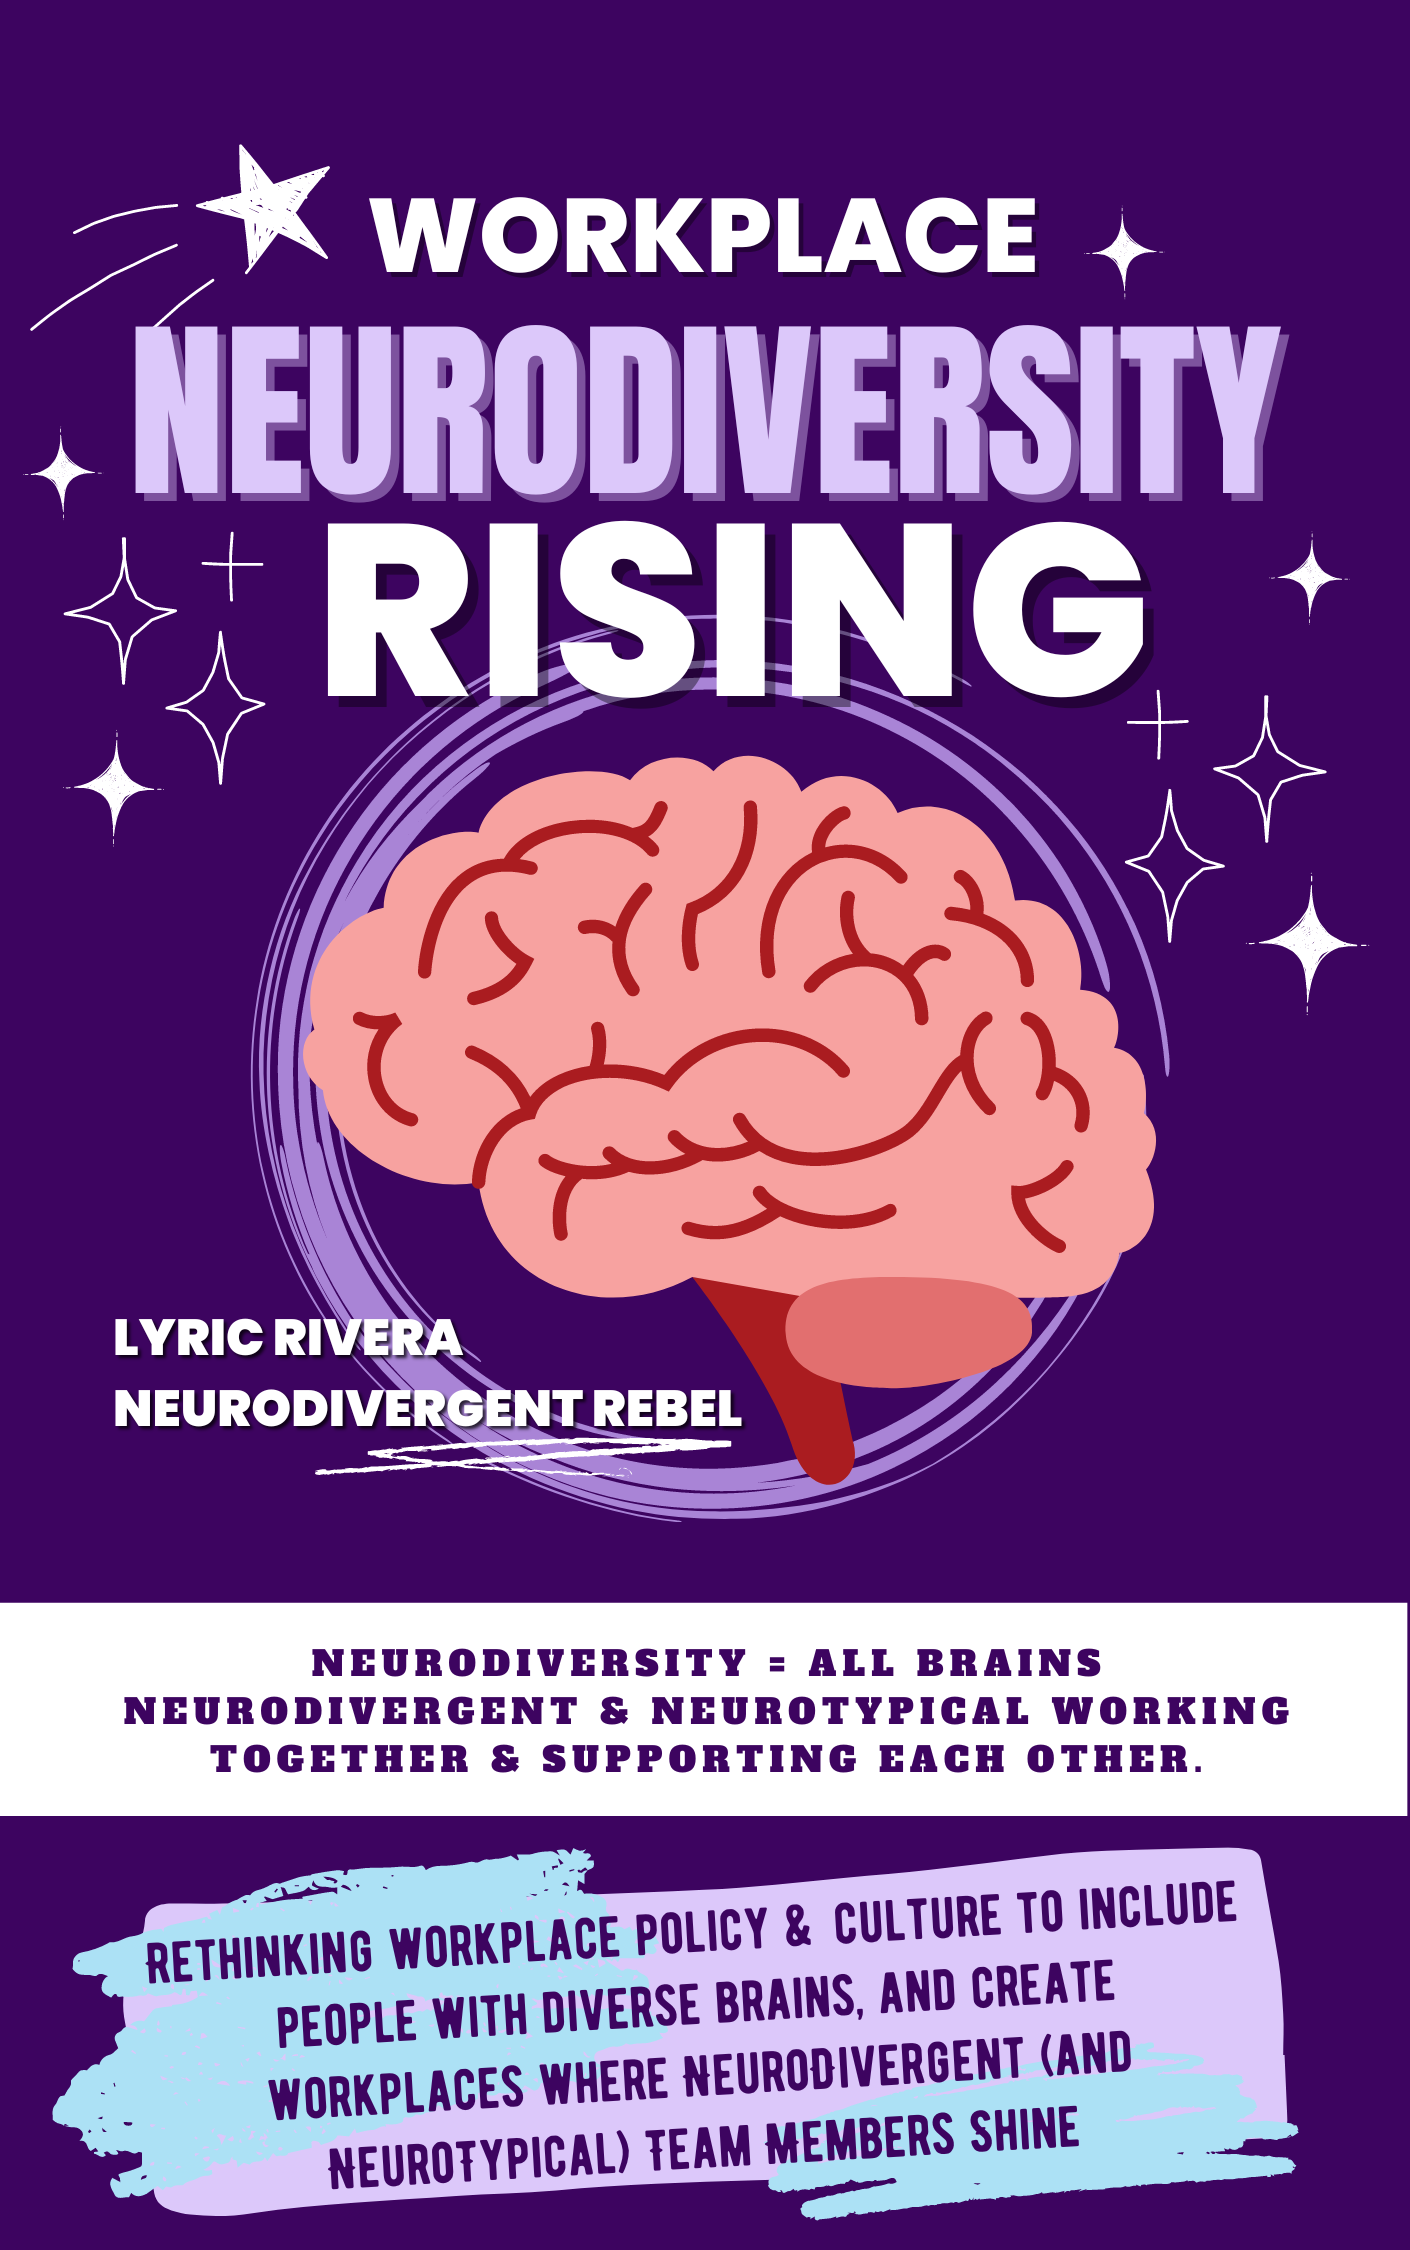 Workplace NeuroDiversity Rising - a purple book with a pink brain on the cover that reads Workplace NeuroDiversity Rising by Lyric Rivera, NeuroDiversity = all brains NeuroDivergent and NeuroTypical working together & supporting each other. Rethinking workplace policy & Culture to include people with diverse brains, and create workplaces where NeuroDivergent (and NeuroTypical) team members shine. 